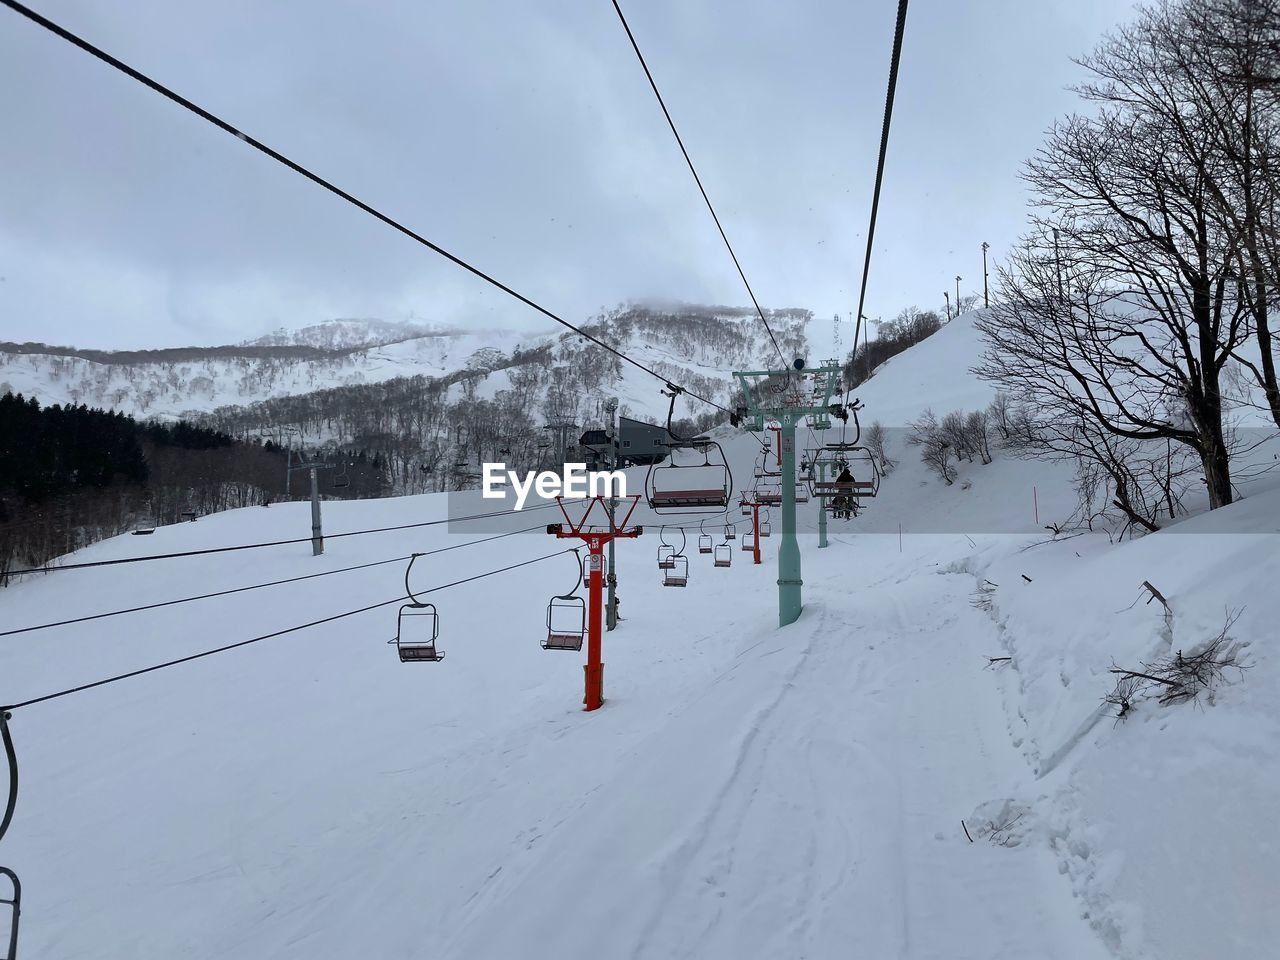 snow, winter, cold temperature, mountain, piste, ski, nature, ski equipment, scenics - nature, cable car, ski lift, tree, environment, landscape, beauty in nature, nordic skiing, sports, skiing, sky, cable, travel, plant, land, sports equipment, winter sports, vacation, holiday, white, day, overhead cable car, travel destinations, mountain range, transportation, trip, forest, tranquil scene, outdoors, tranquility, snowcapped mountain, non-urban scene, cloud, frozen, architecture, pinaceae, leisure activity